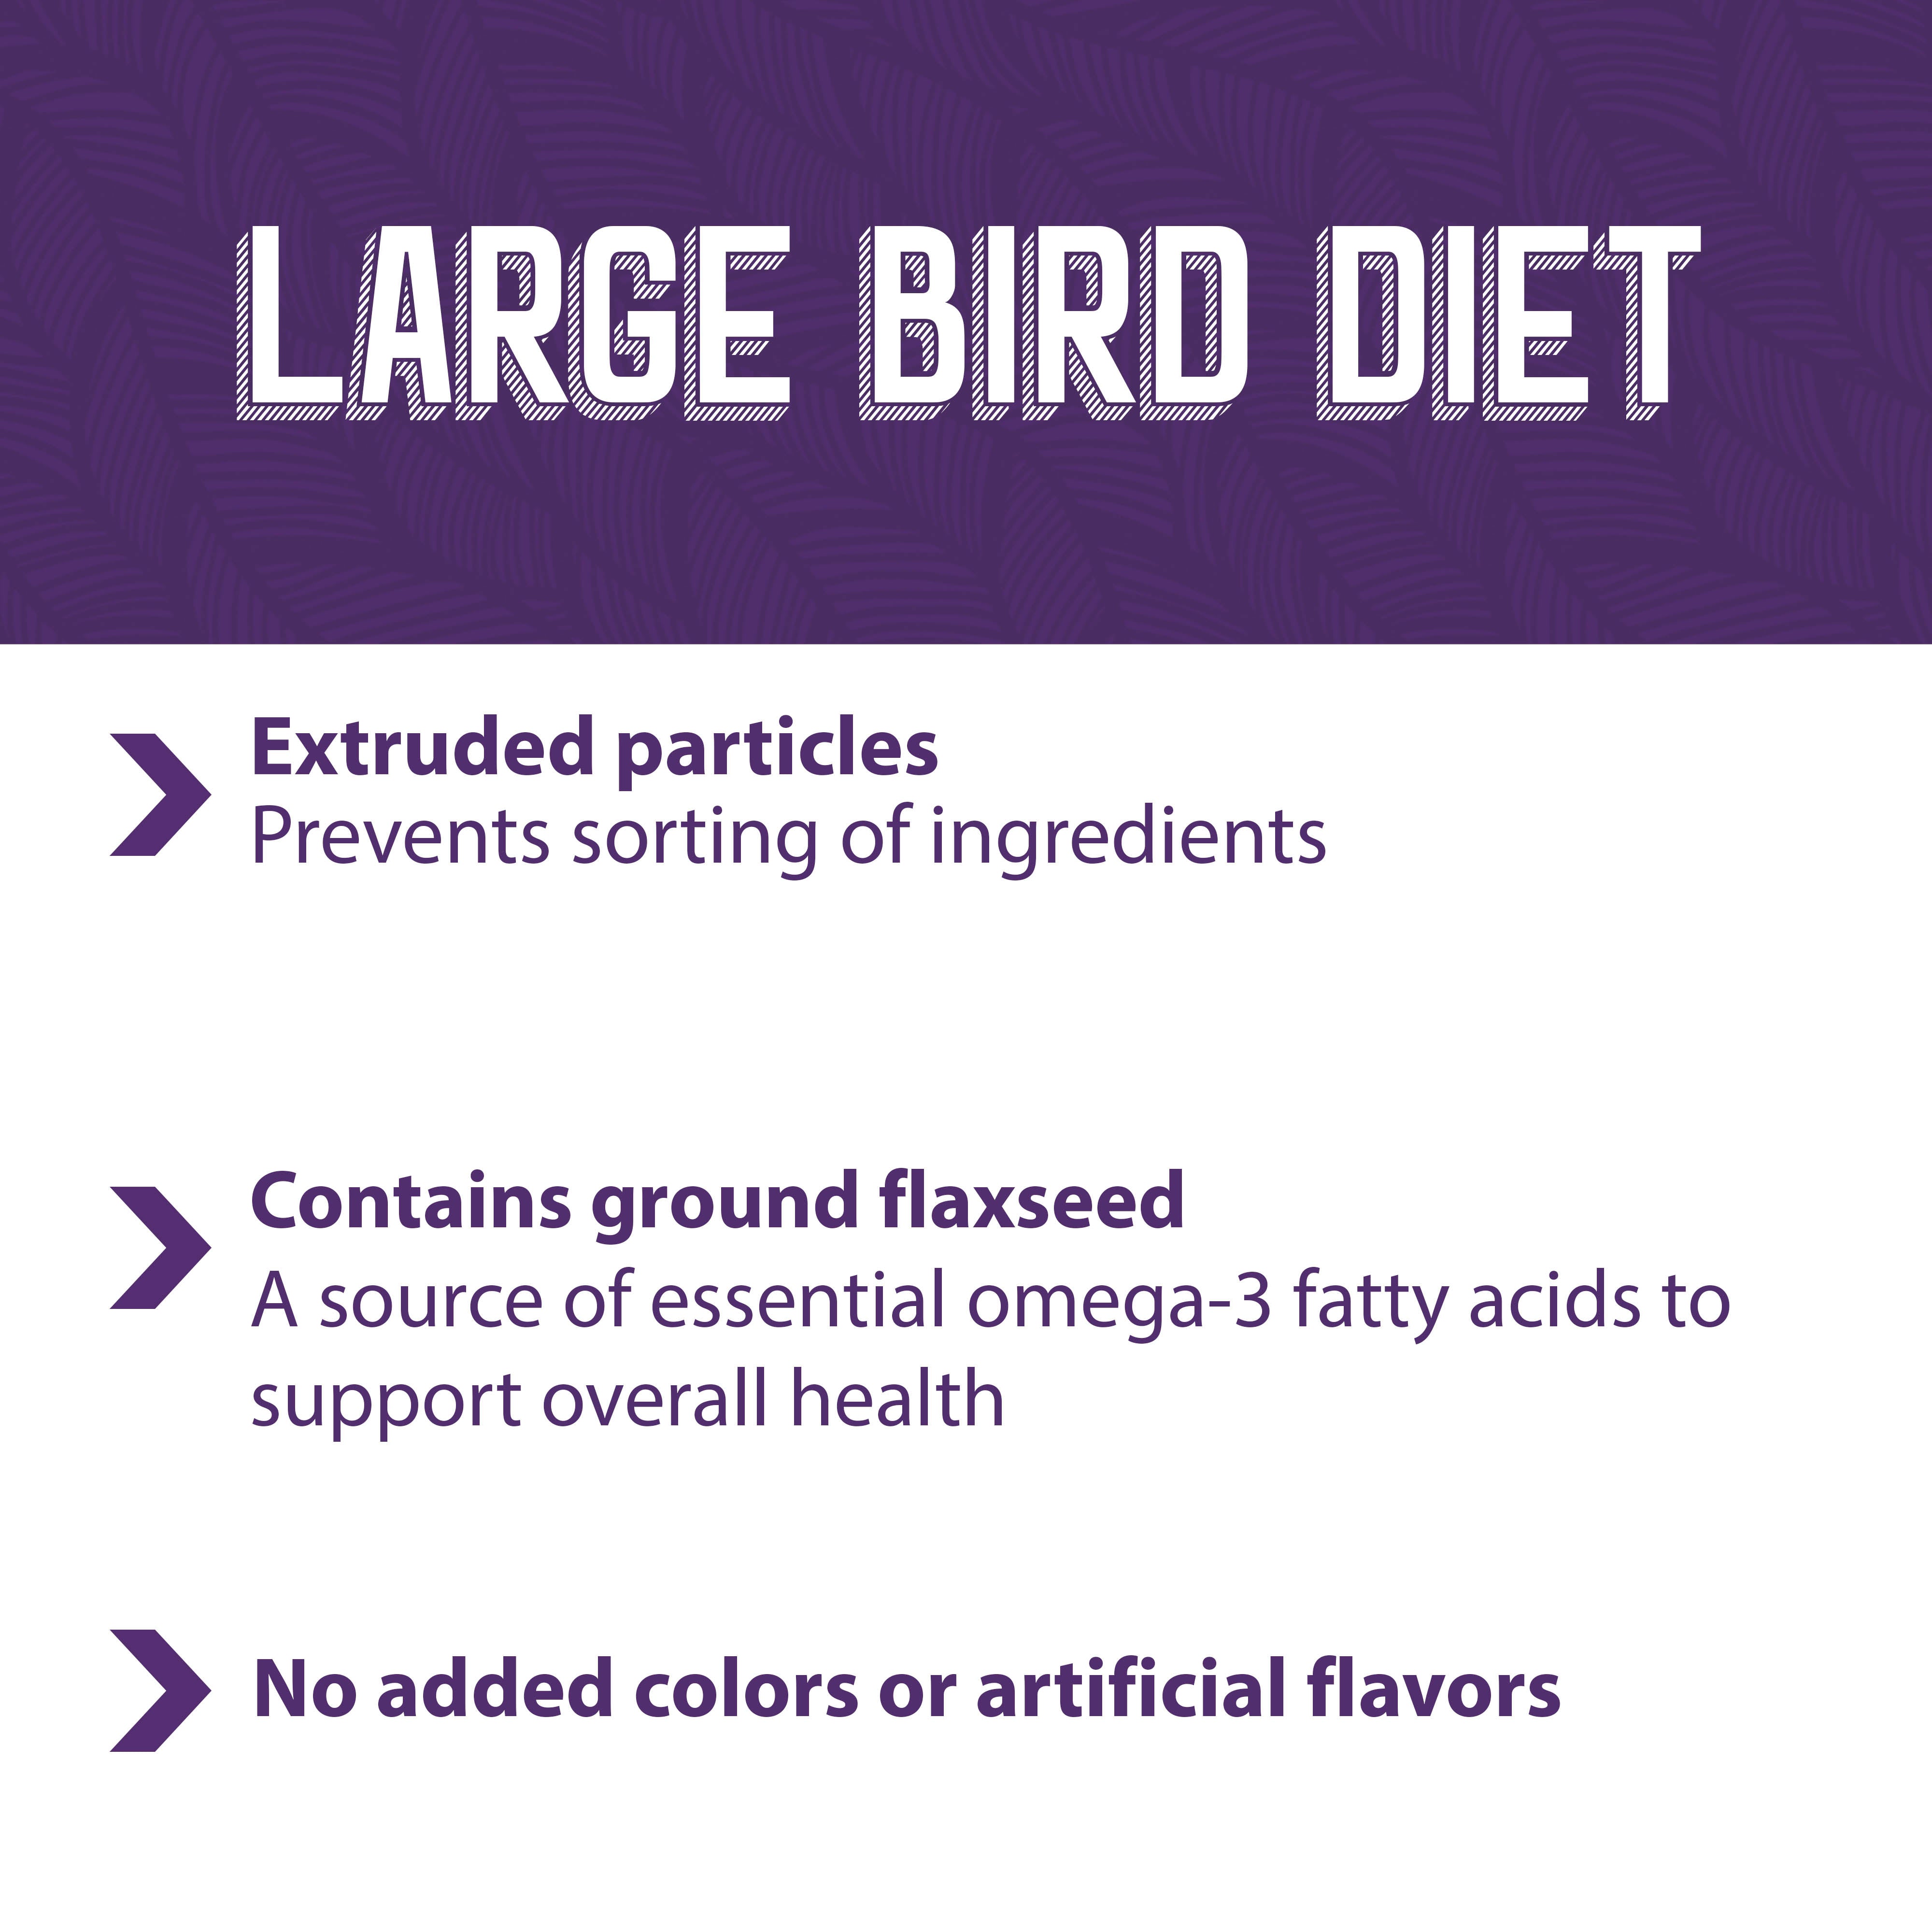 Large bird diet contains ground flaxseed